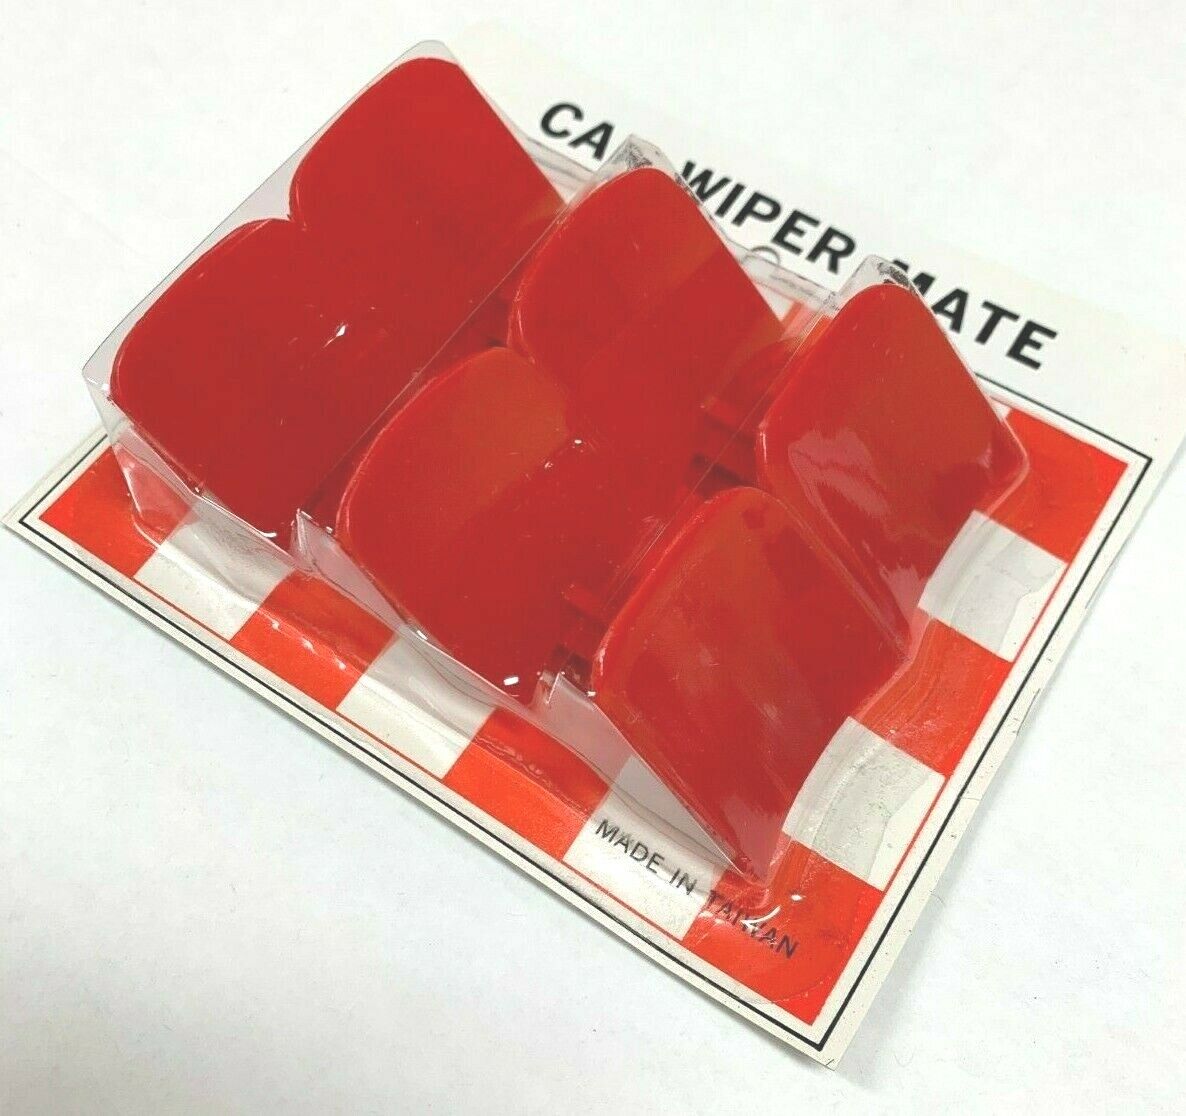 RED VINTAGE WINDSHIELD WIPER SPOILER AID STYLING  TUNE UP CM-13 R